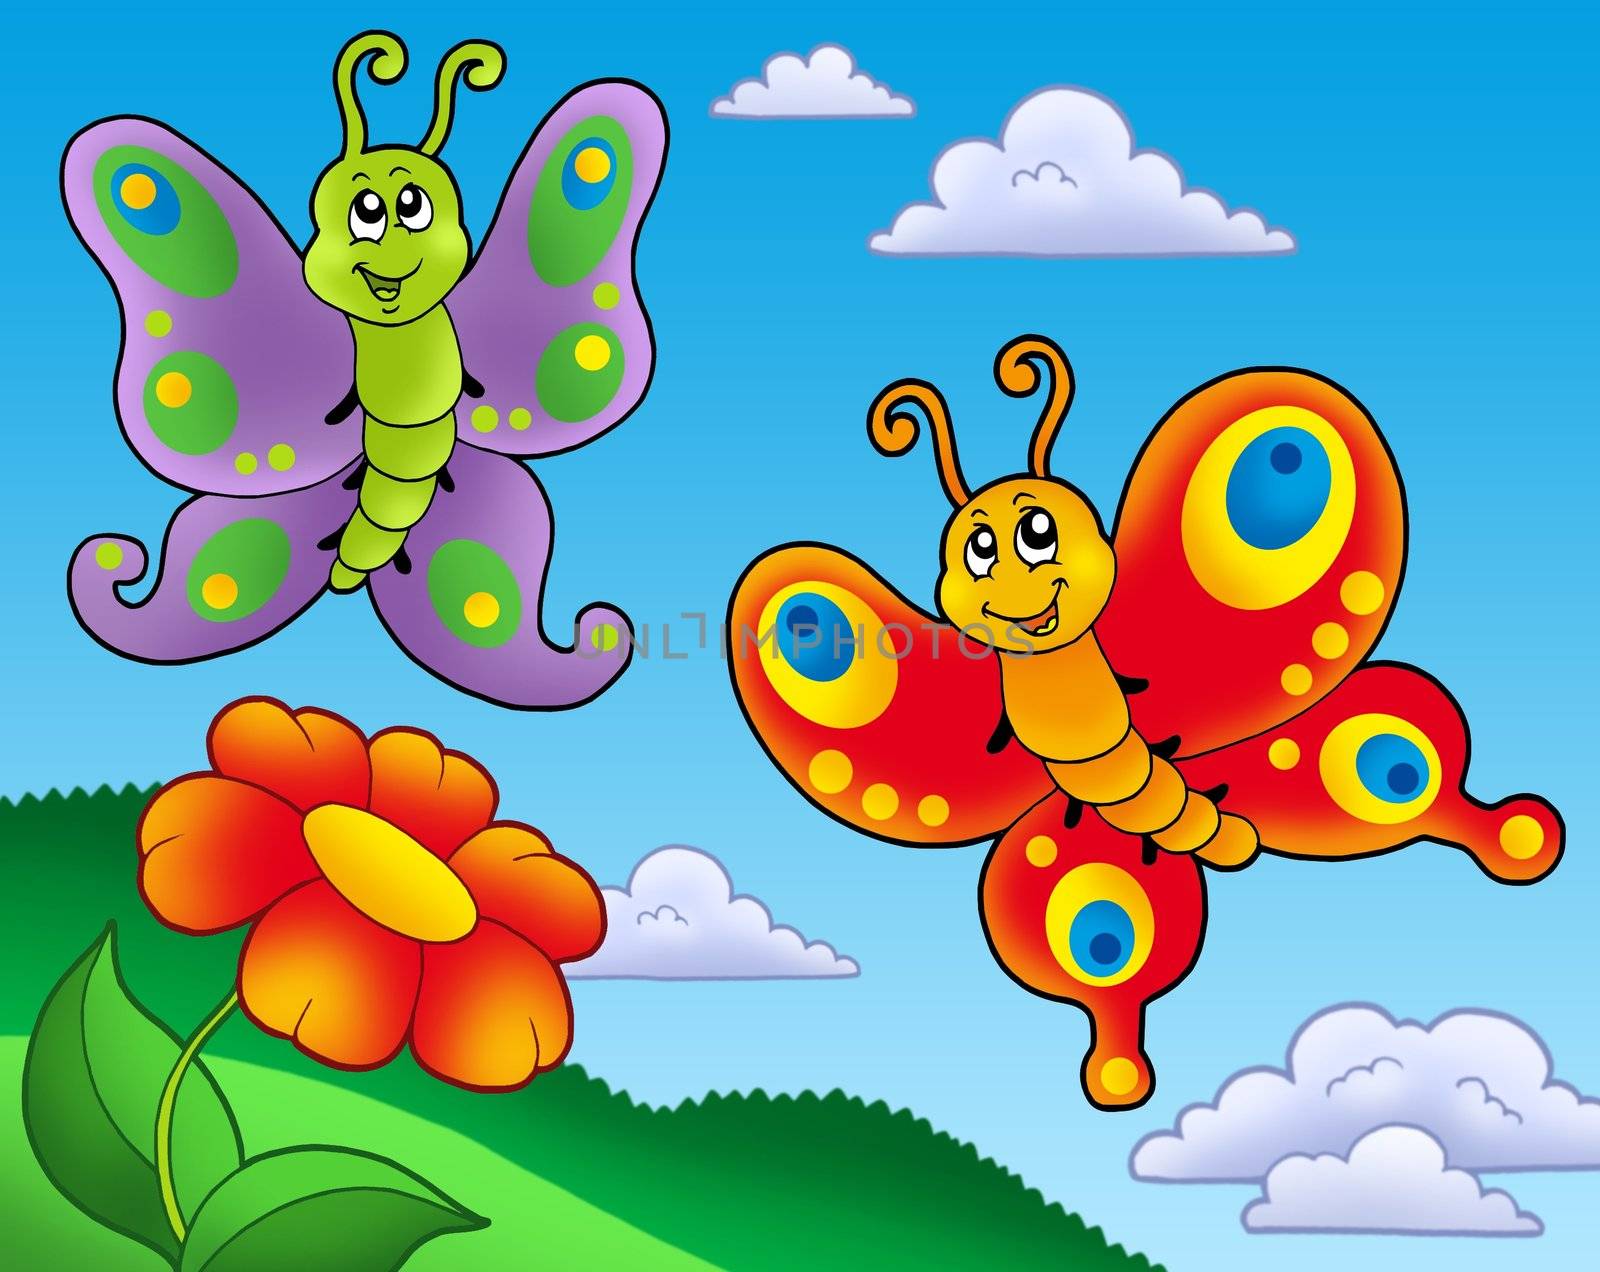 Two butterflies with red flower - color illustration.